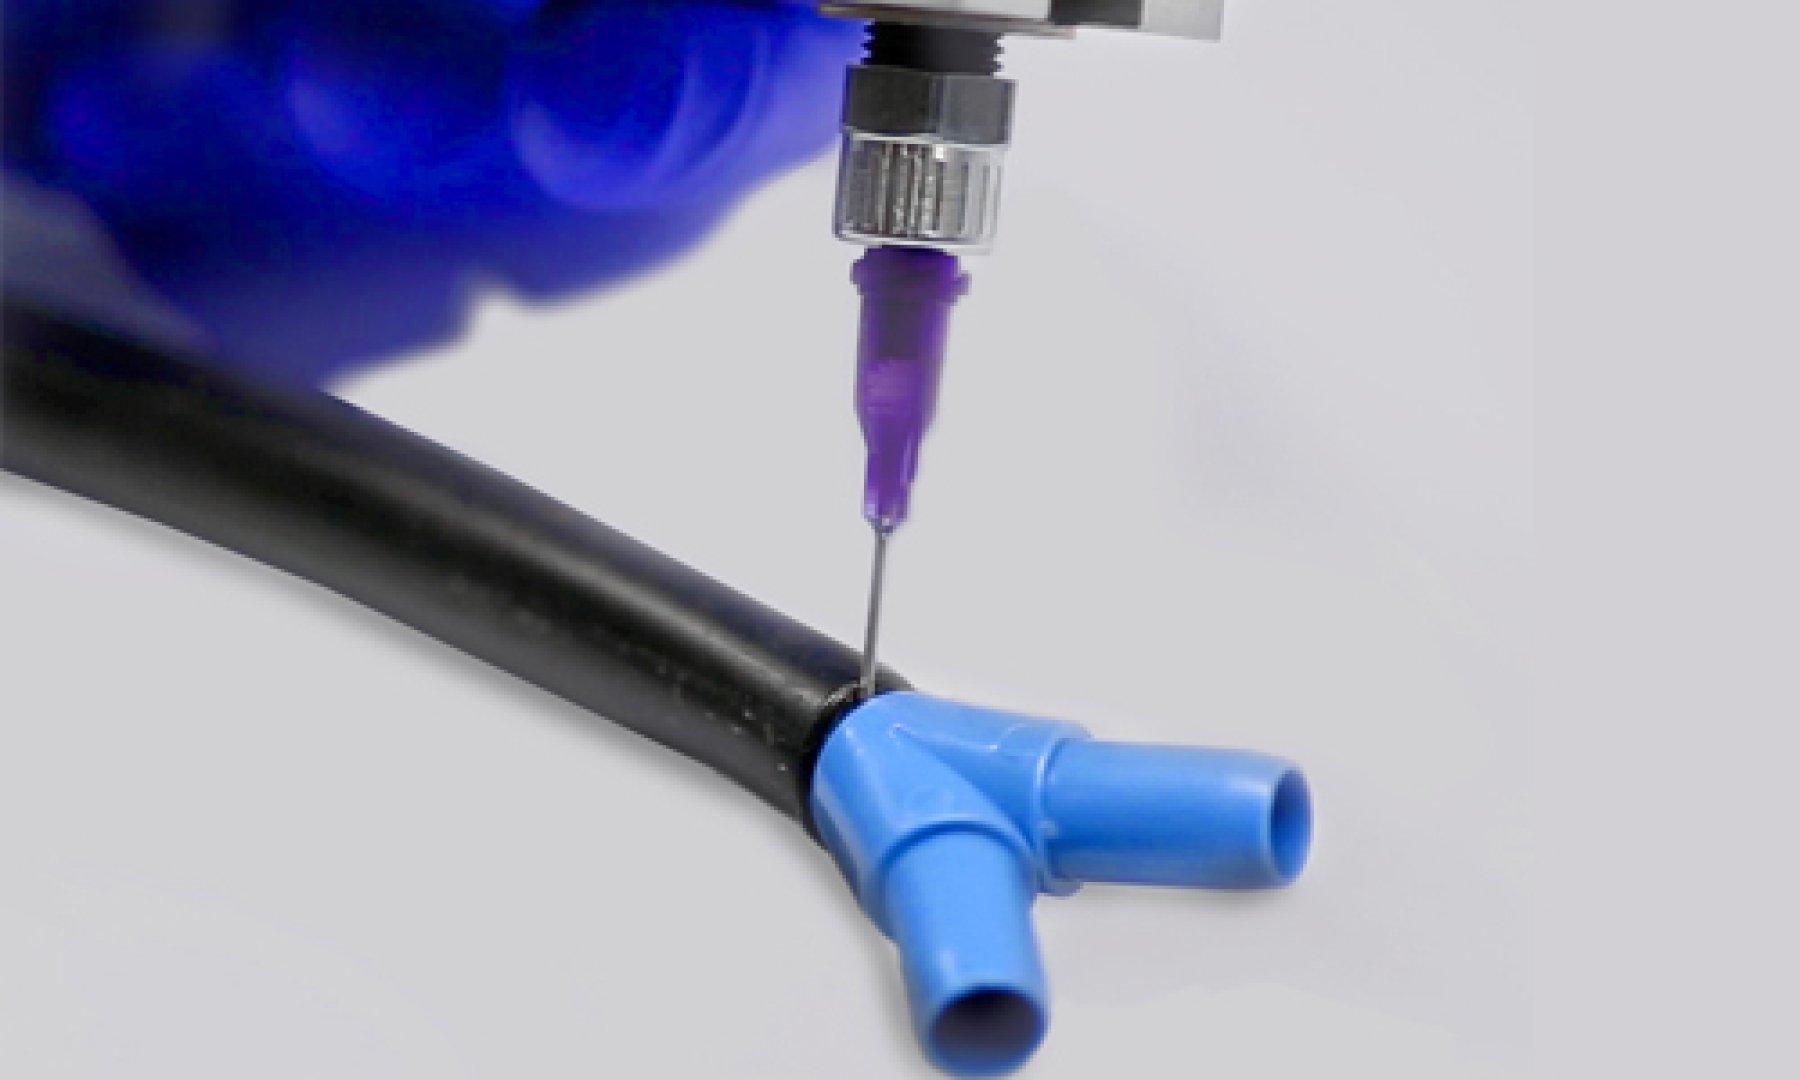 A Dymax 455 Dispensing Valve is used to apply an Hybrid Light-Curable adhesive to substrates.